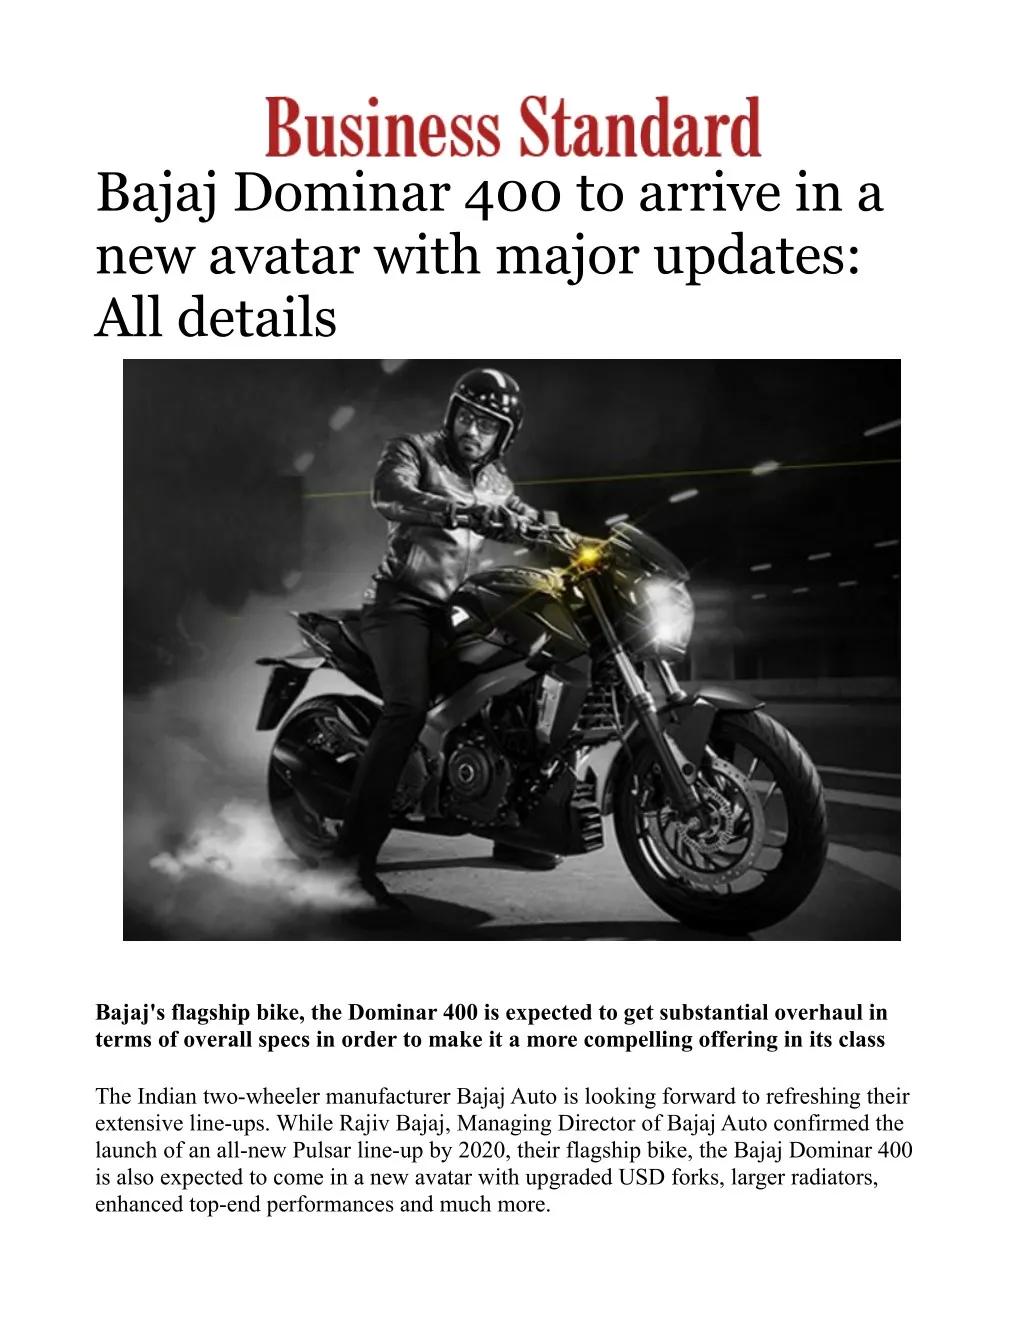 bajaj dominar 400 to arrive in a new avatar with